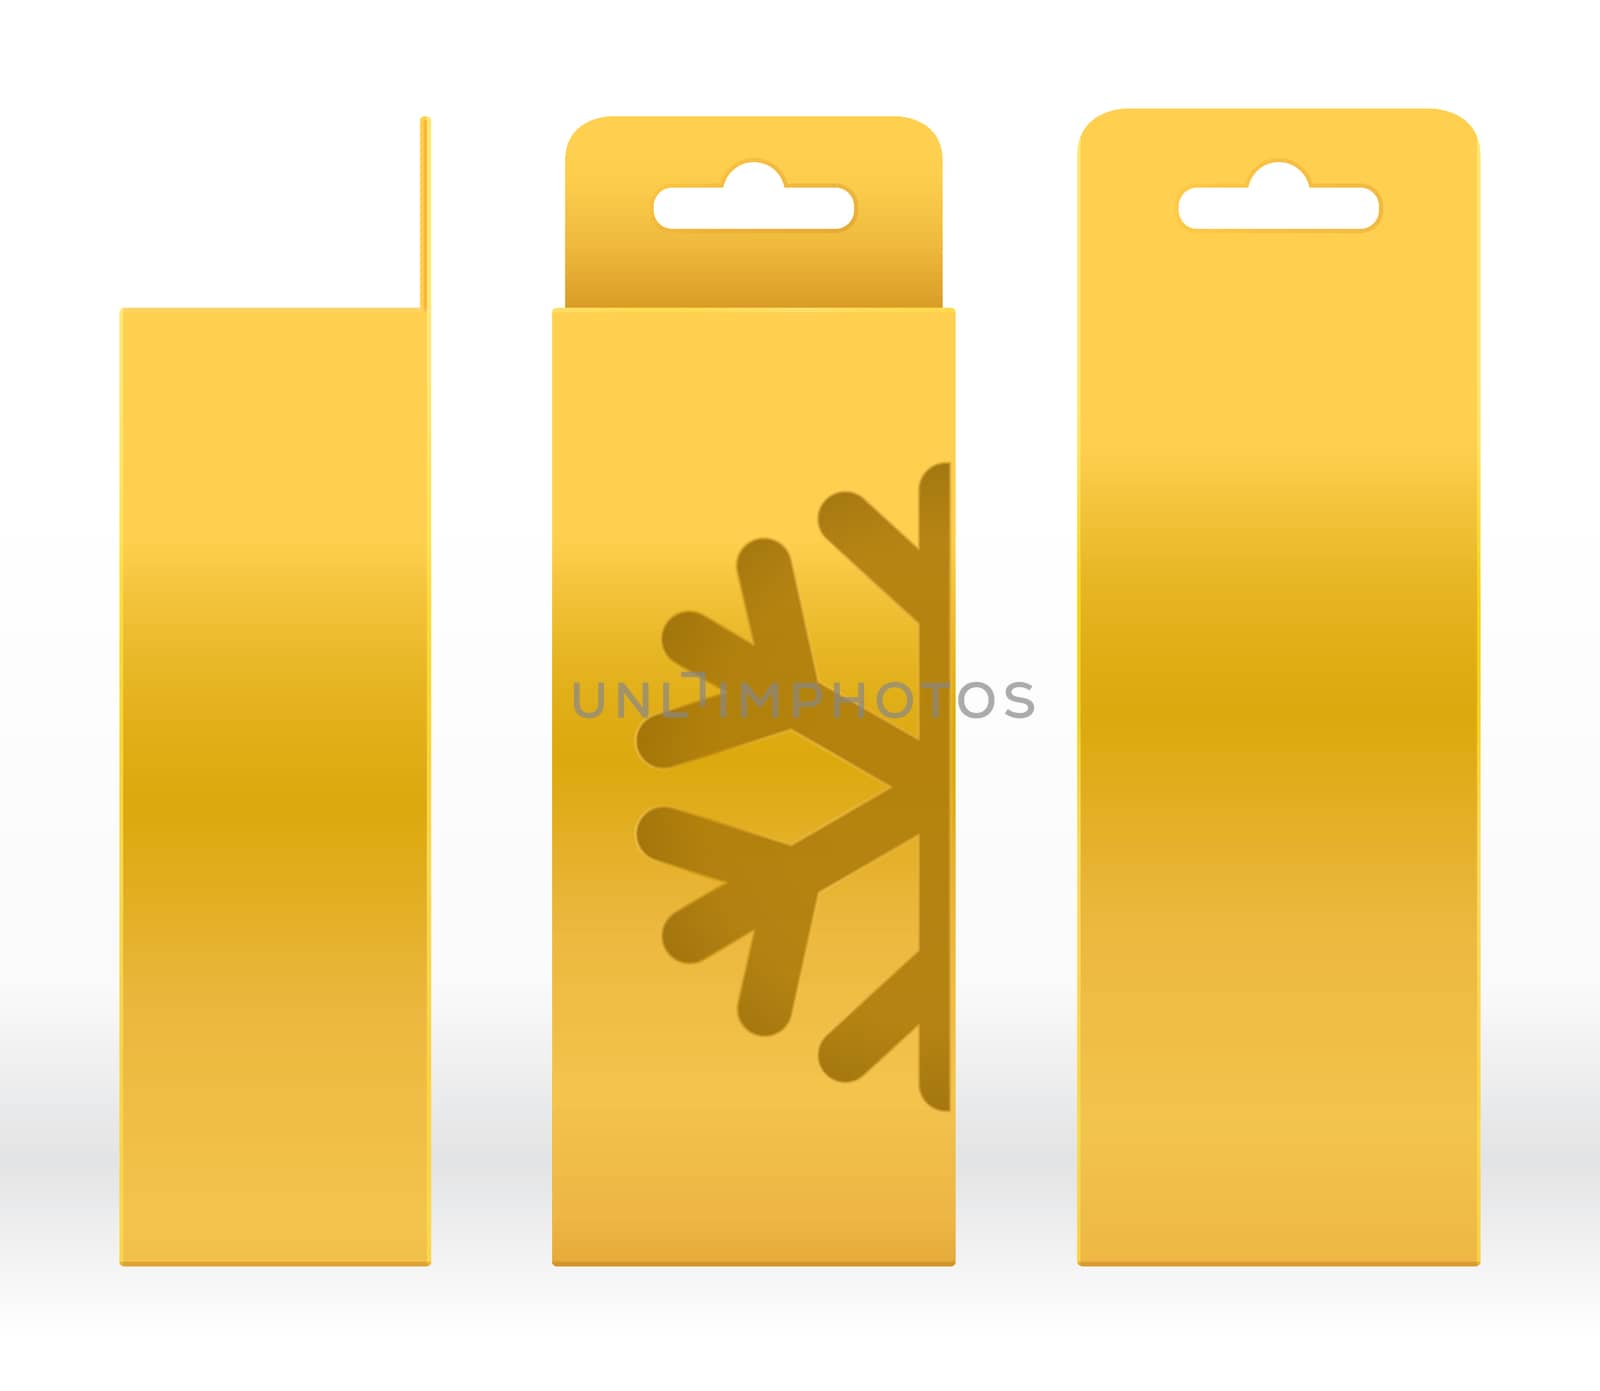 Hanging Box Gold window Snow Shape cut out Packaging Template blank. Luxury Empty Box Golden Template for design product package gift box, Gold Box packaging paper kraft cardboard package